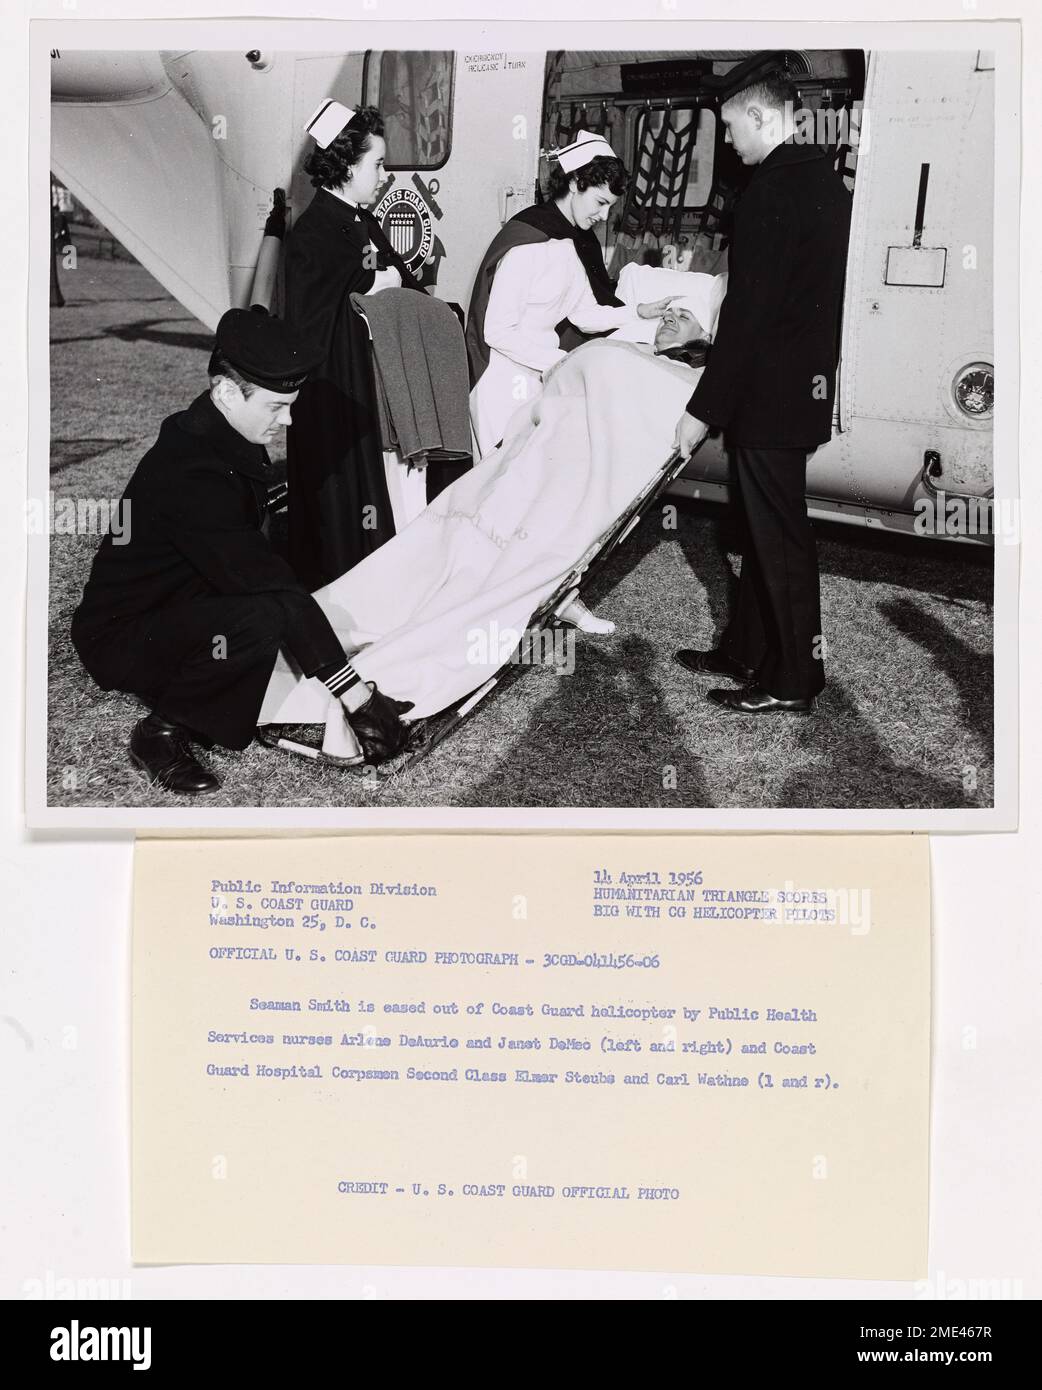 Rescue of Seaman Smith. This image depicts a description of the transfer of Seaman John Smith to a hospital by nurses Arlene DeAurie and Janet DeMeo and Coast Guard corpsmen Elmer Steubs and Carl Wathne. Stock Photo